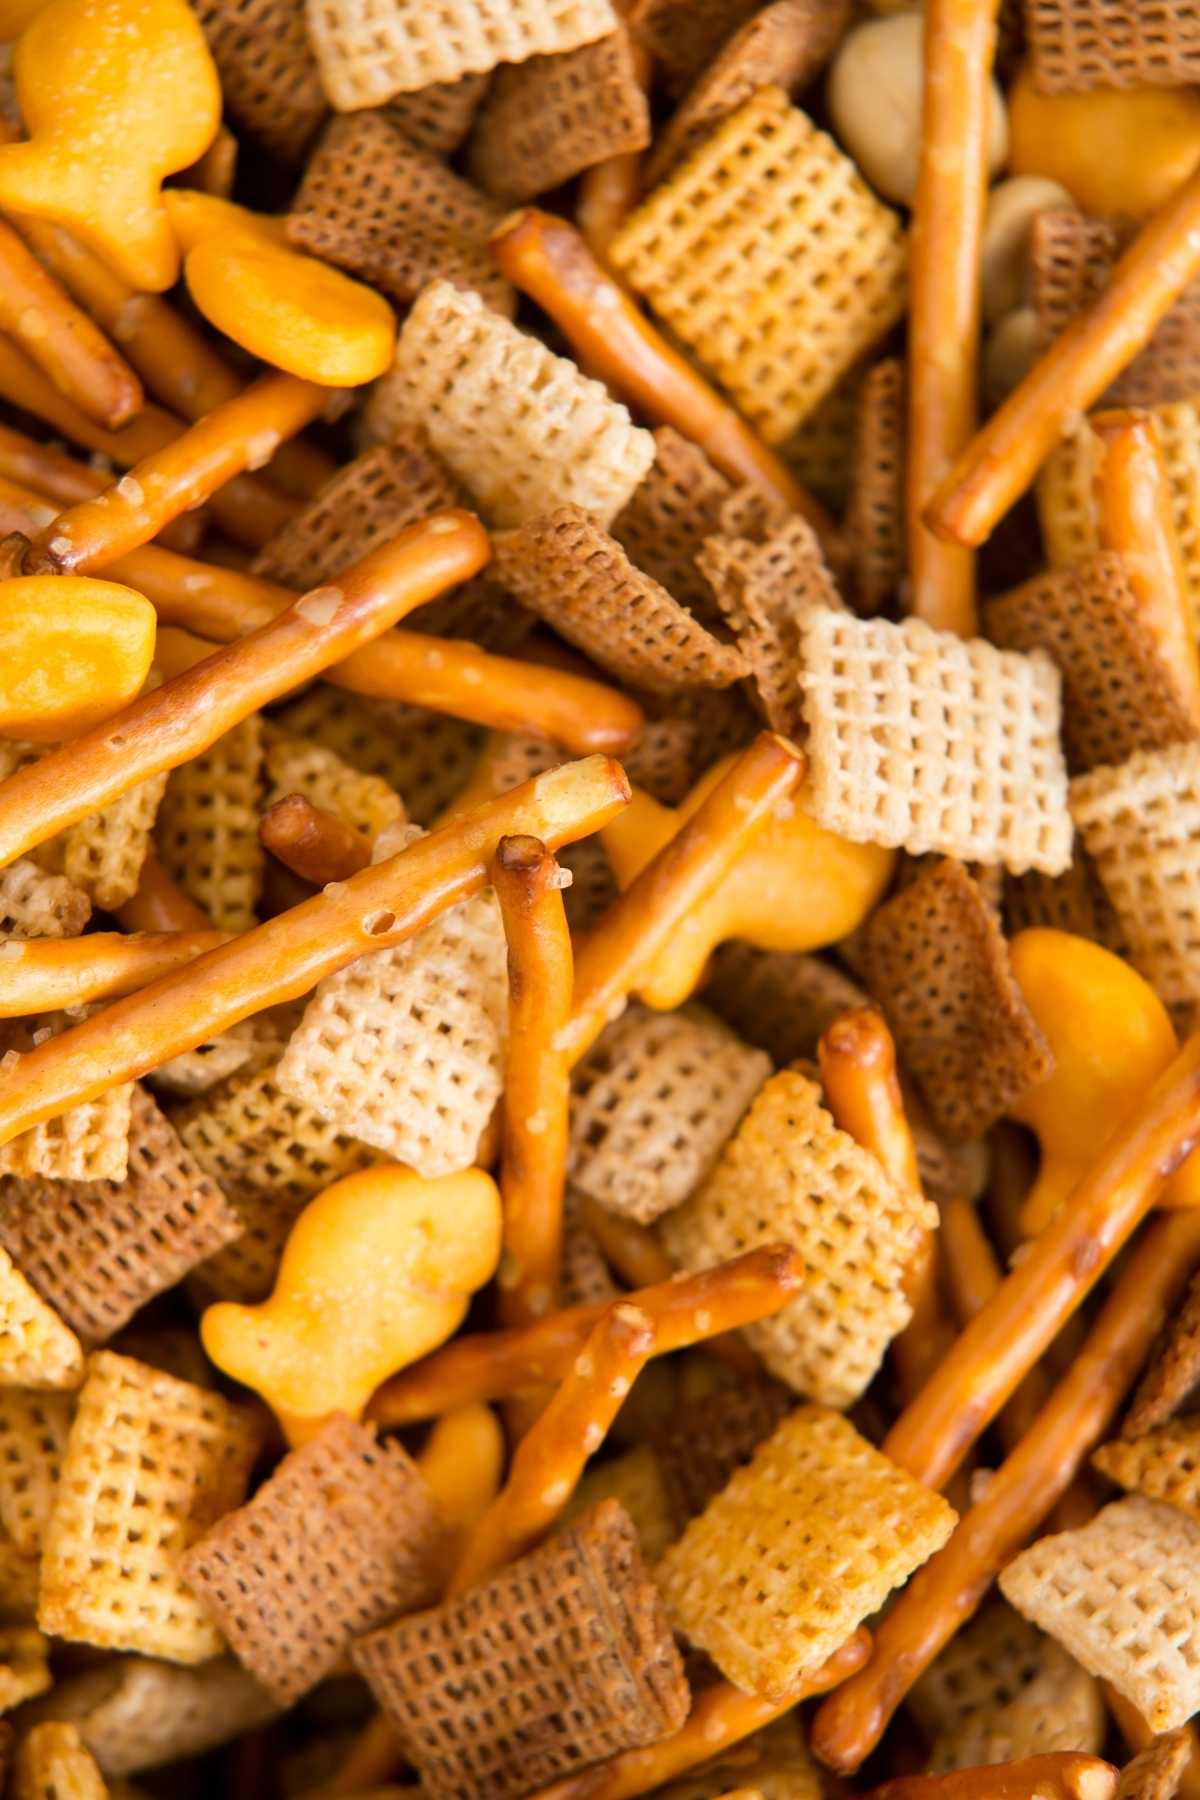 With this quick and simple recipe, you can make your own tasty Chex Mix snack to enjoy when friends and family come over. Made with Chex cereal, cheese crackers, pretzels, nuts, and a delicious sauce, this savory mix is salty, crunchy, and baked to perfection. Just be careful; it's also highly addictive!